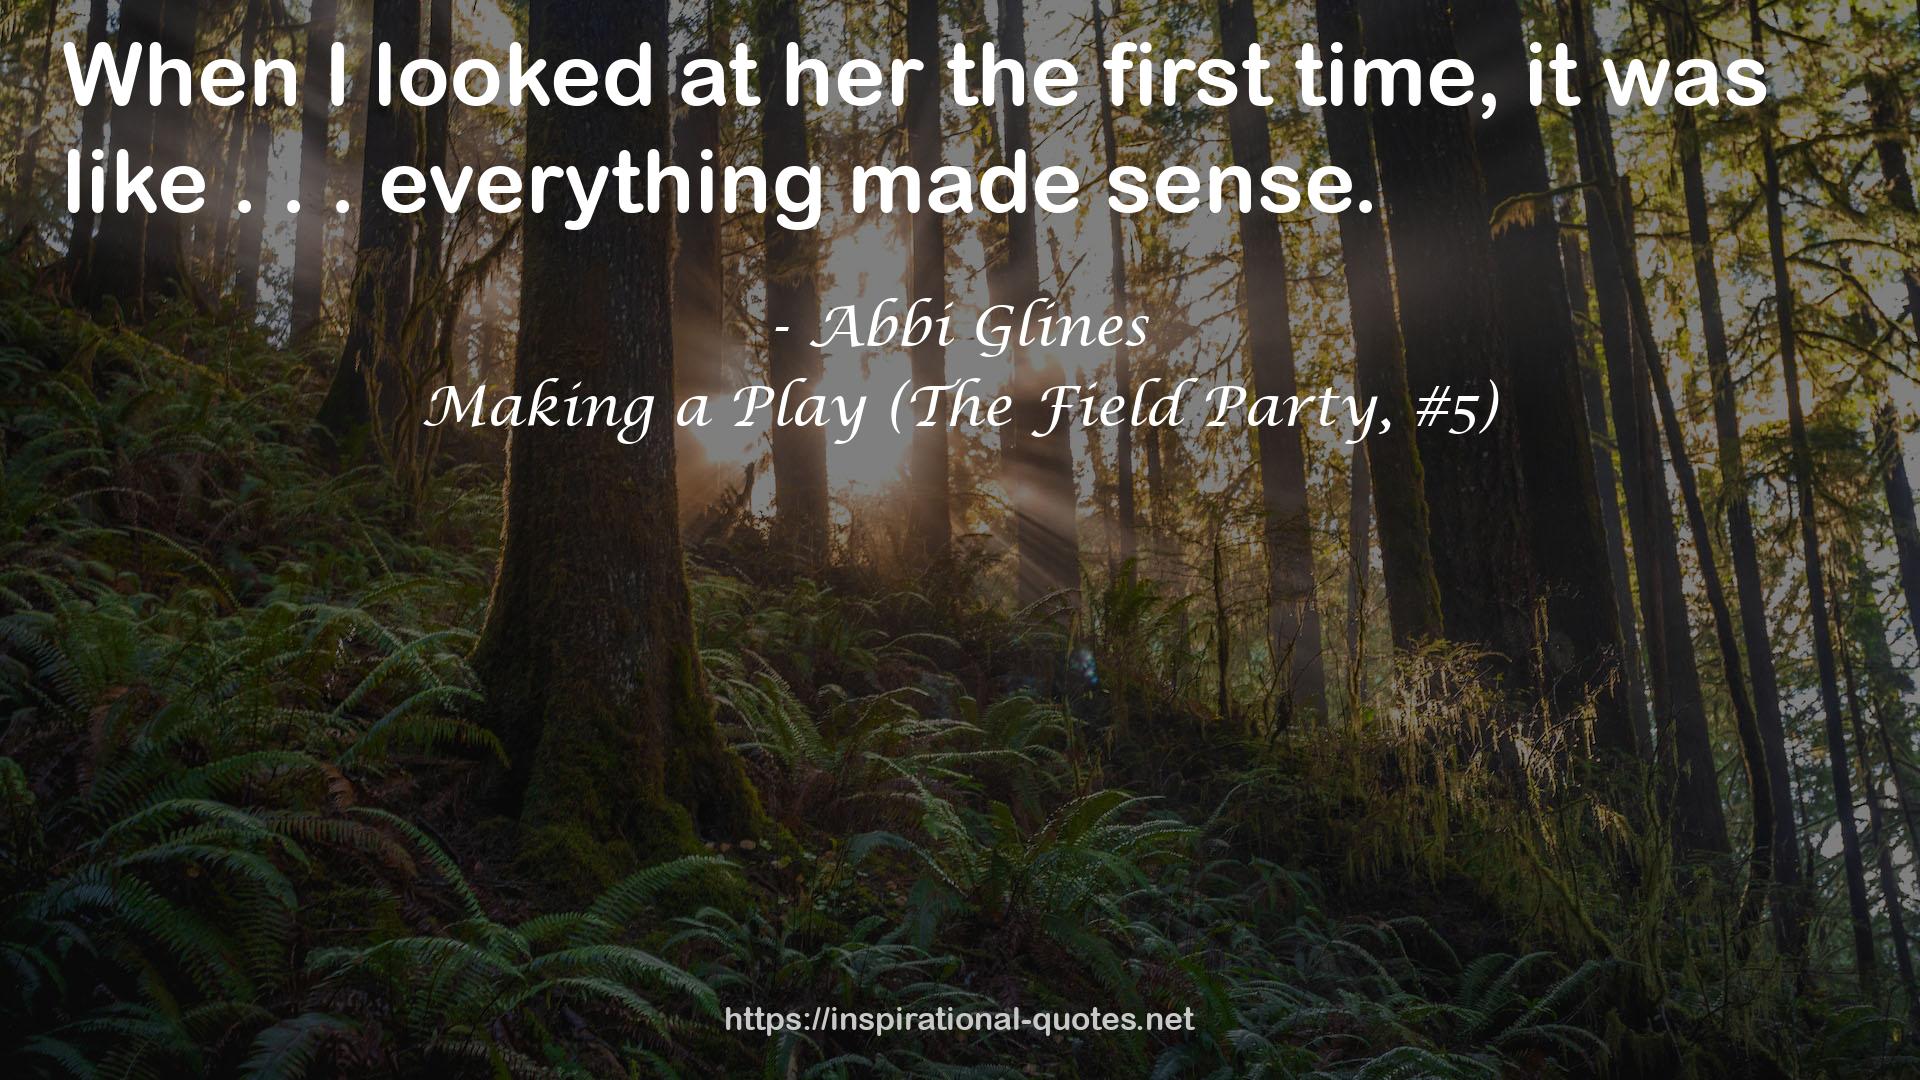 Making a Play (The Field Party, #5) QUOTES